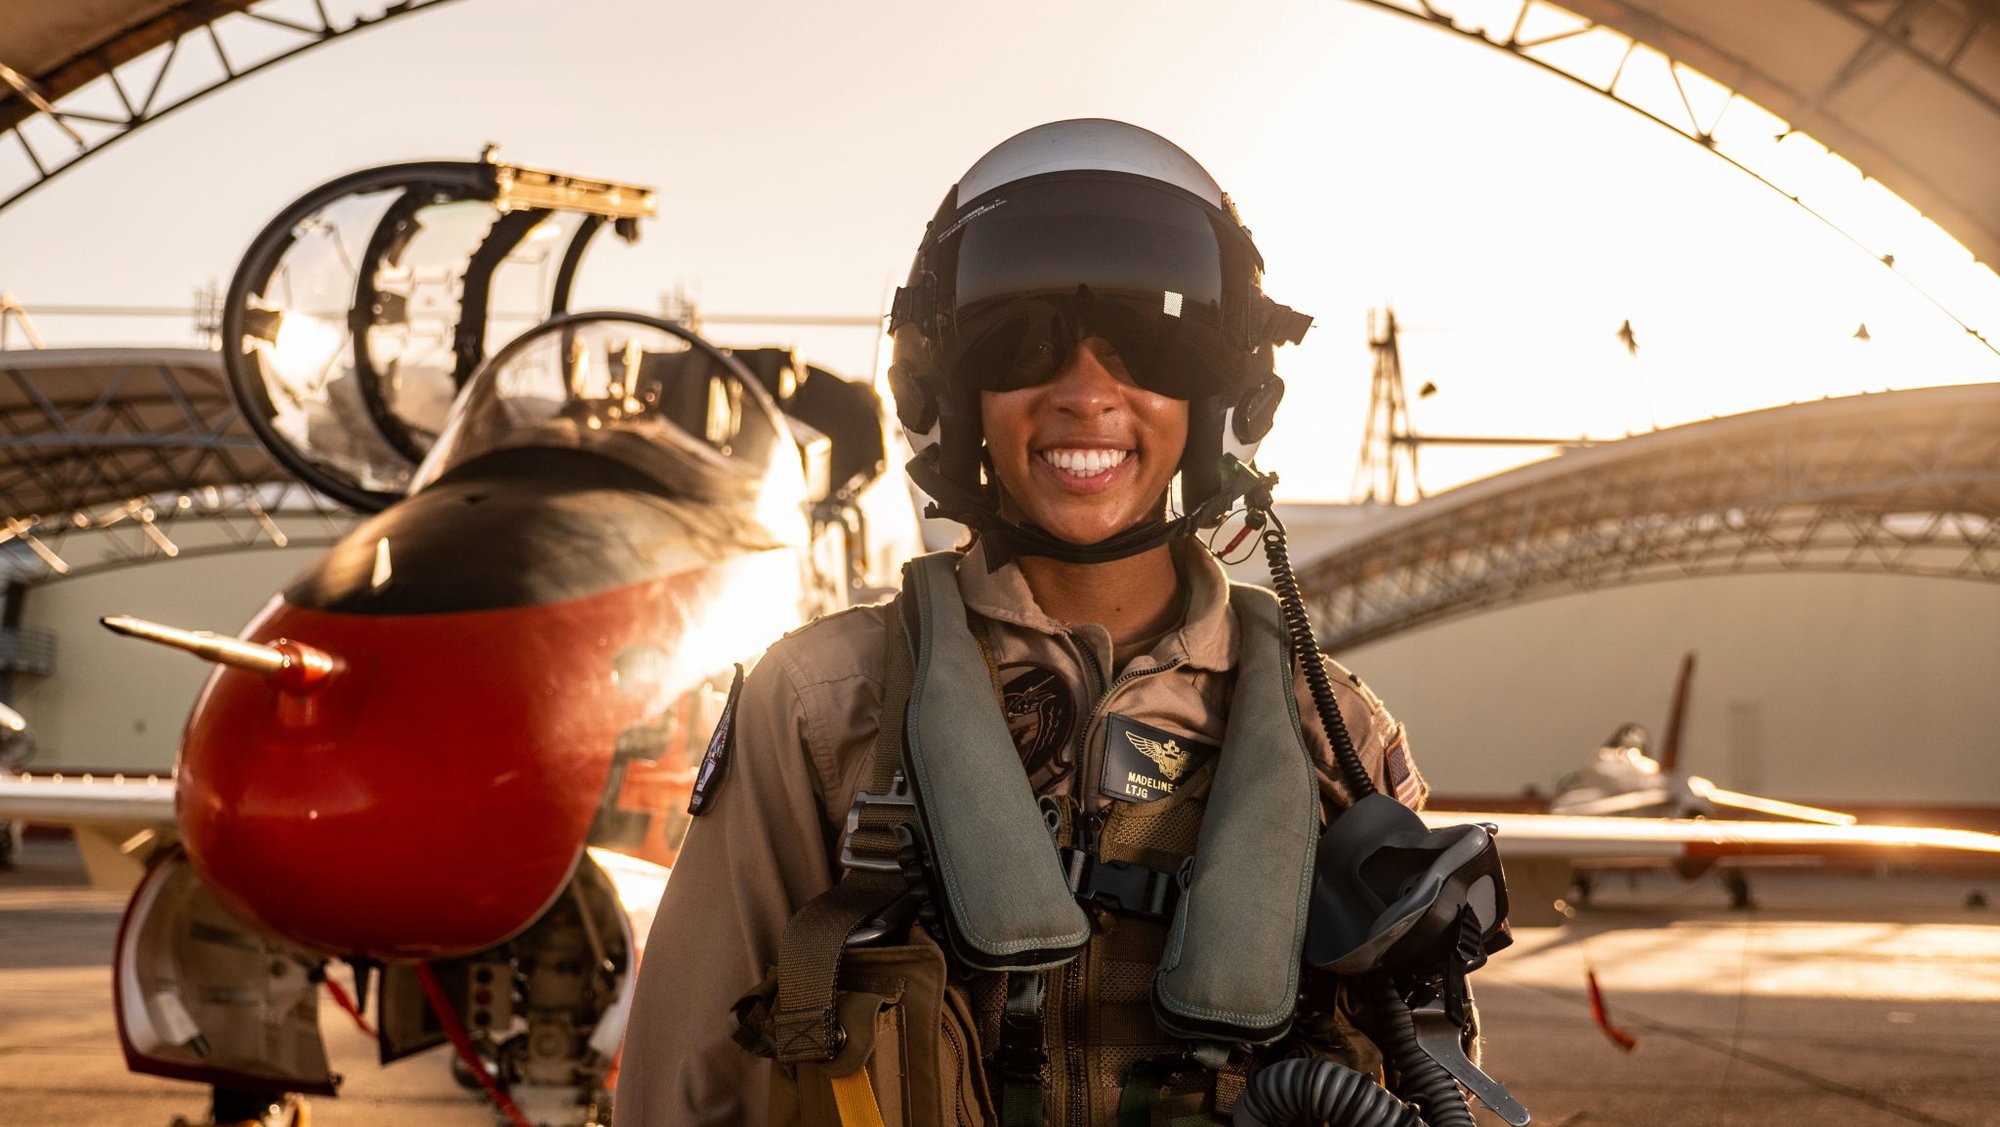 Lt. j.g. Madeline “Maddy” Swegle poses for a photograph in front of a U.S. Navy T-45 Goshawk training aircraft during undergraduate Tactical Air (Strike) pilot training syllabus at Naval Air Station Kingsville, Texas. Swegle is the Navy’s first Black female to graduate and become a tactical jet aviator. (U.S. Navy photo by Austin Rooney/released)